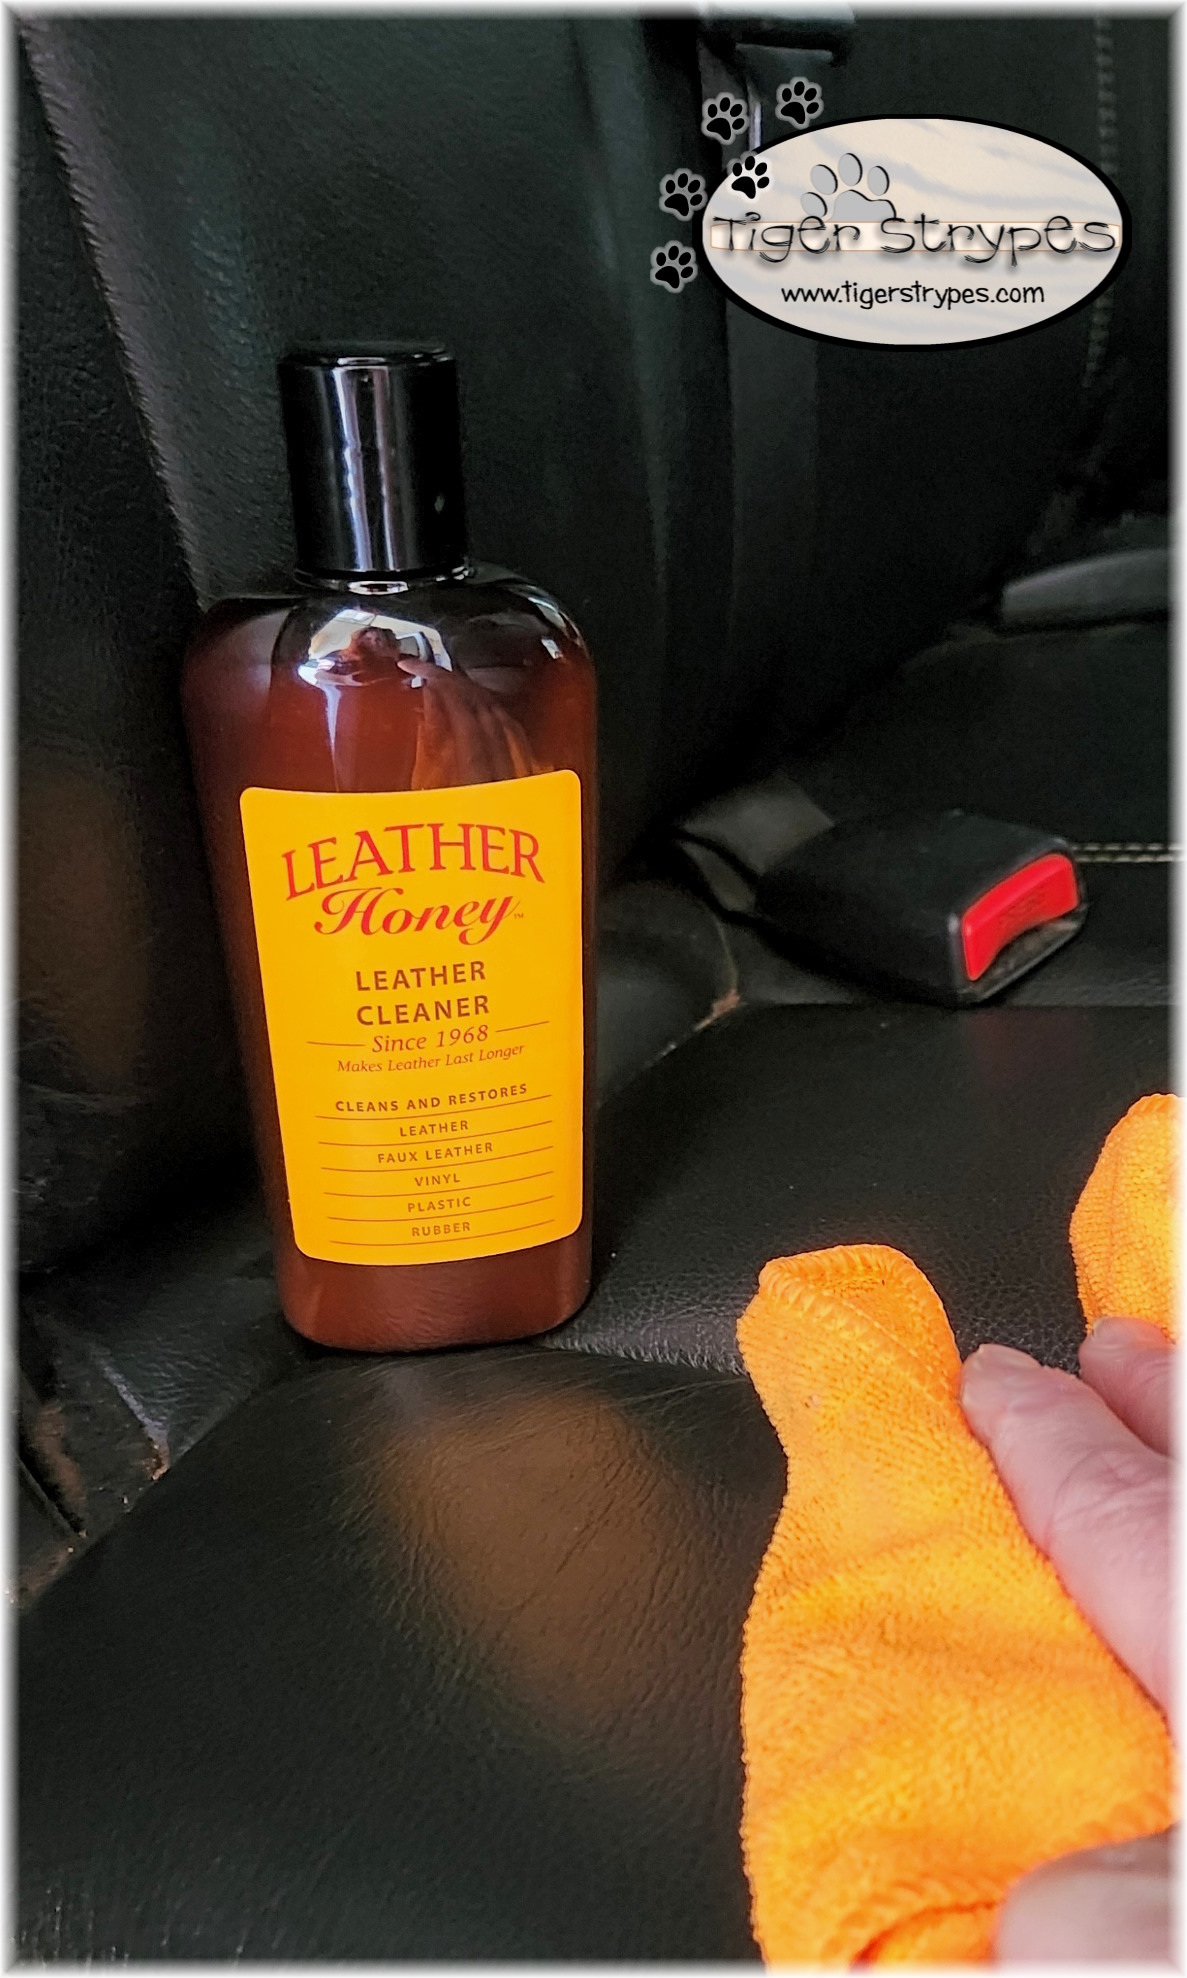 Leather Honey Review - Decidedly Equestrian